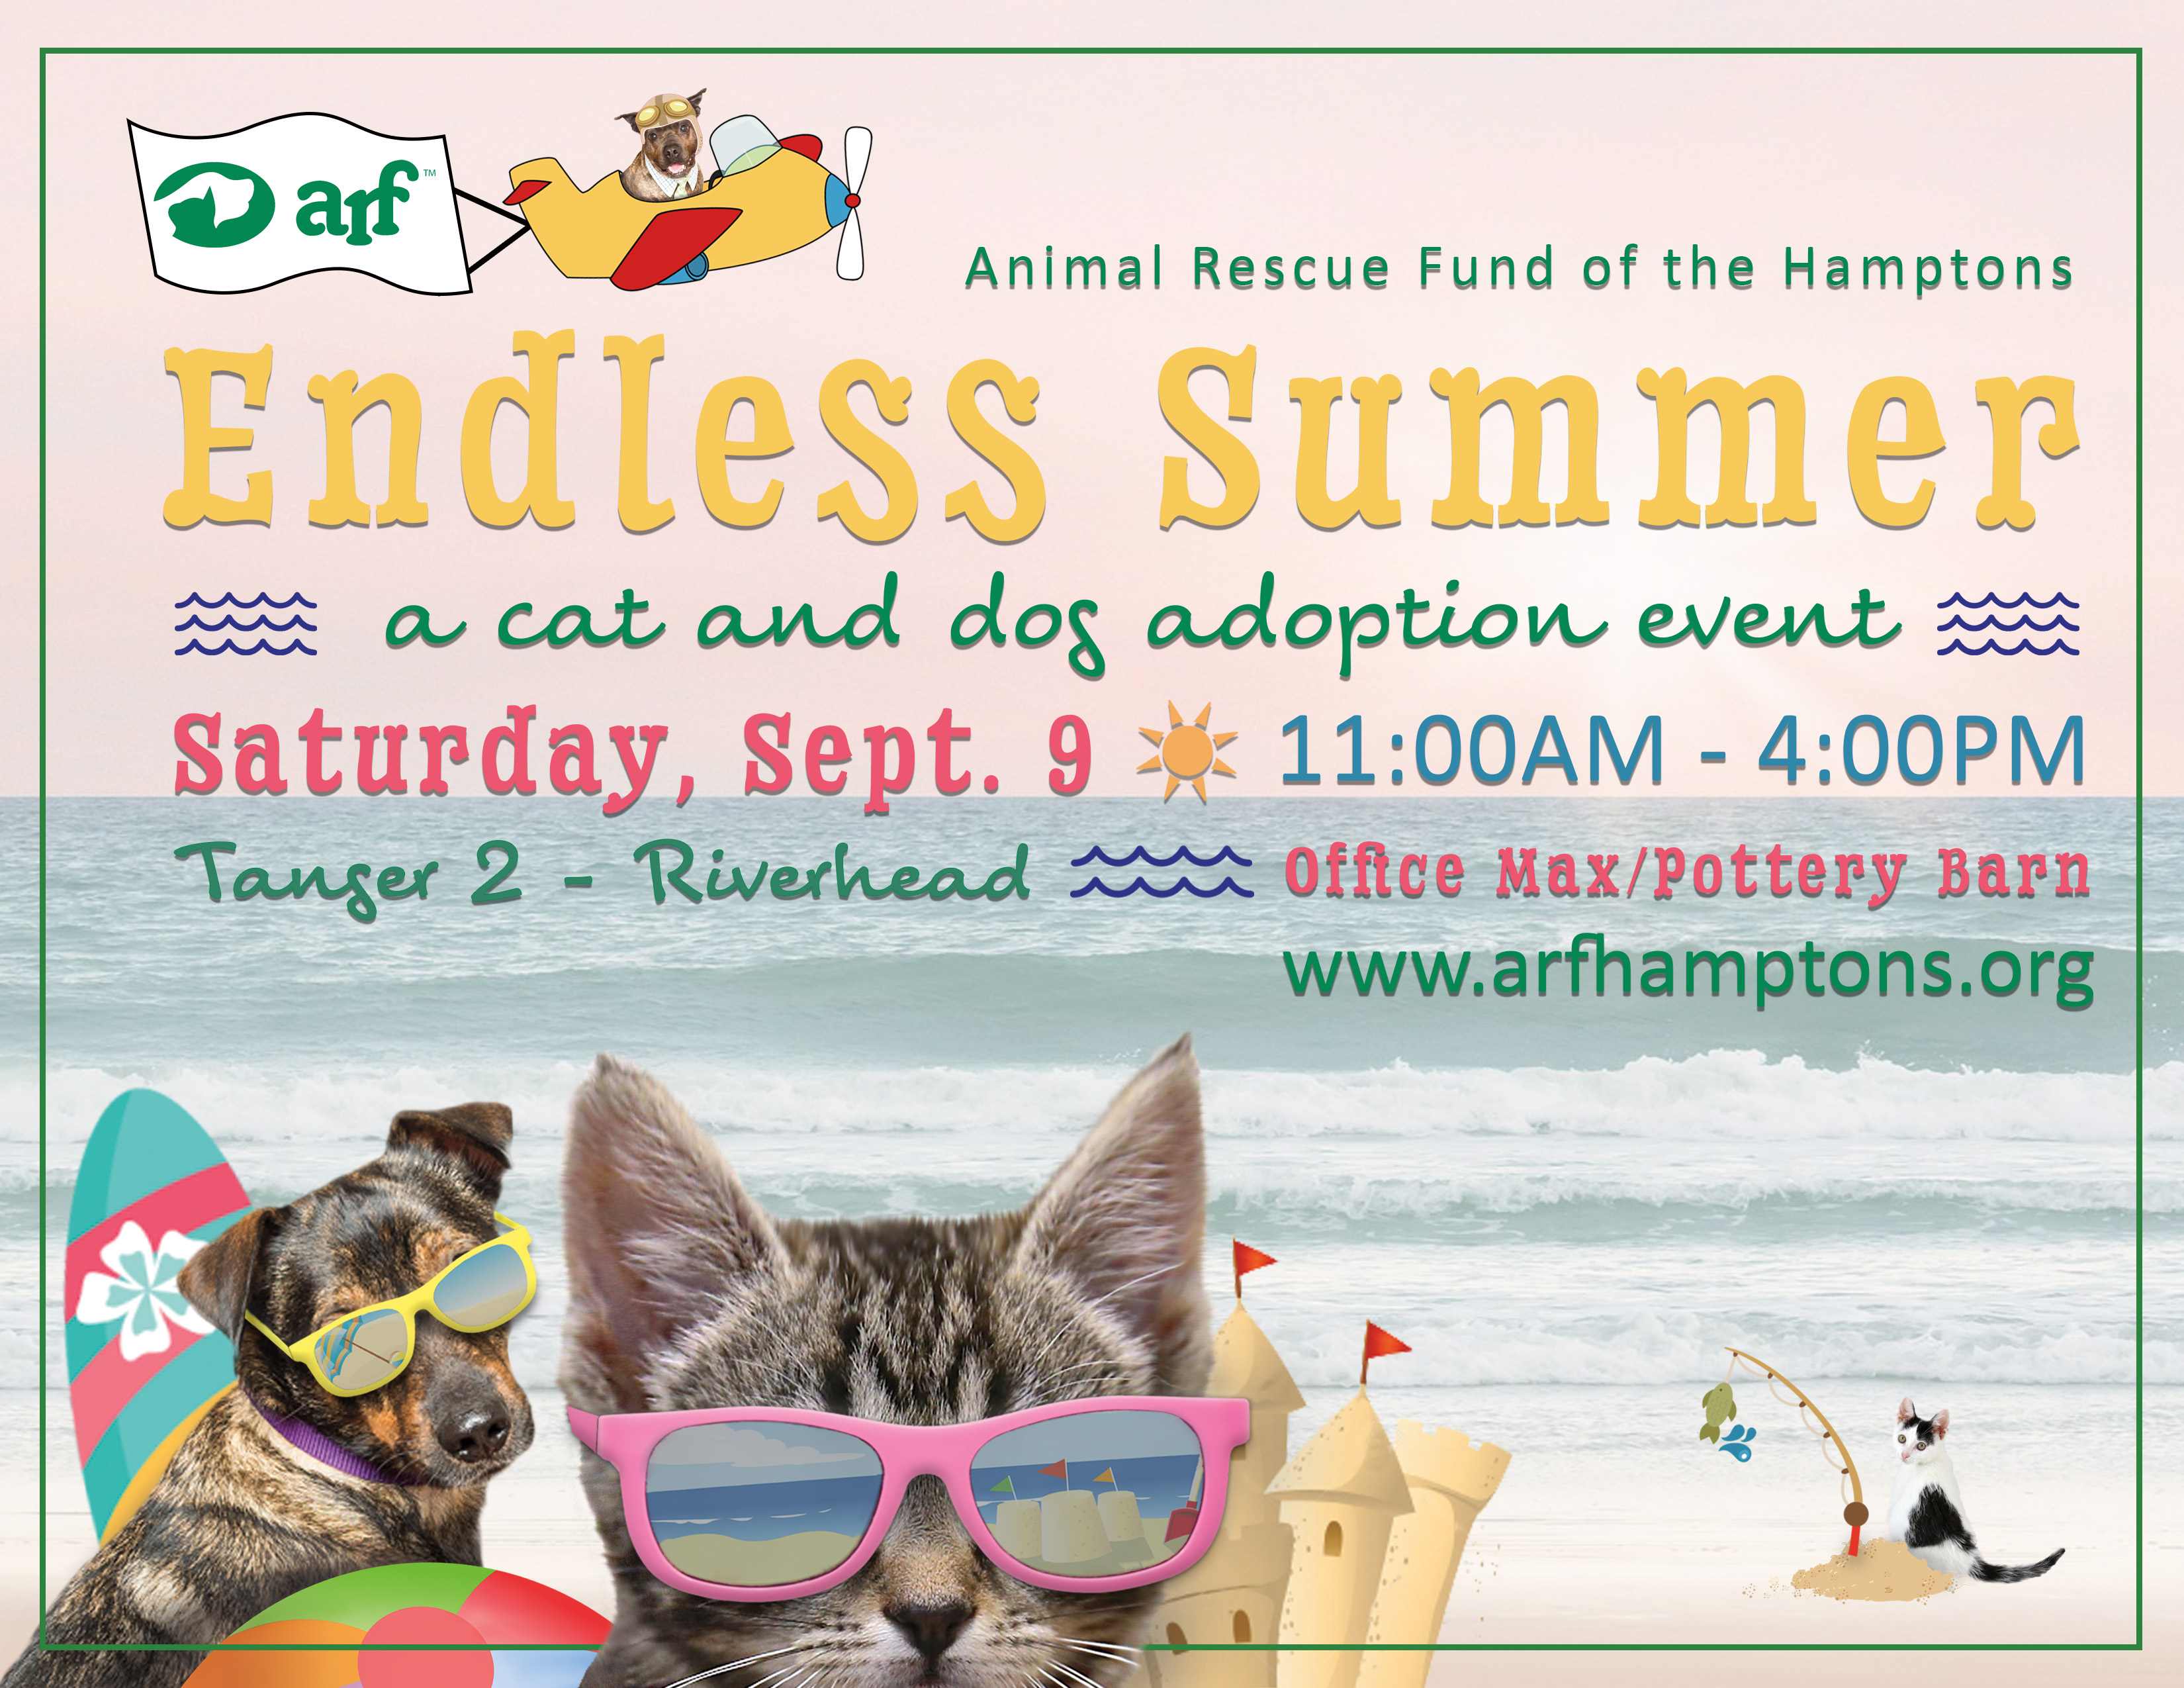 ARF's Endless Summer | Animal Rescue Fund of the Hamptons